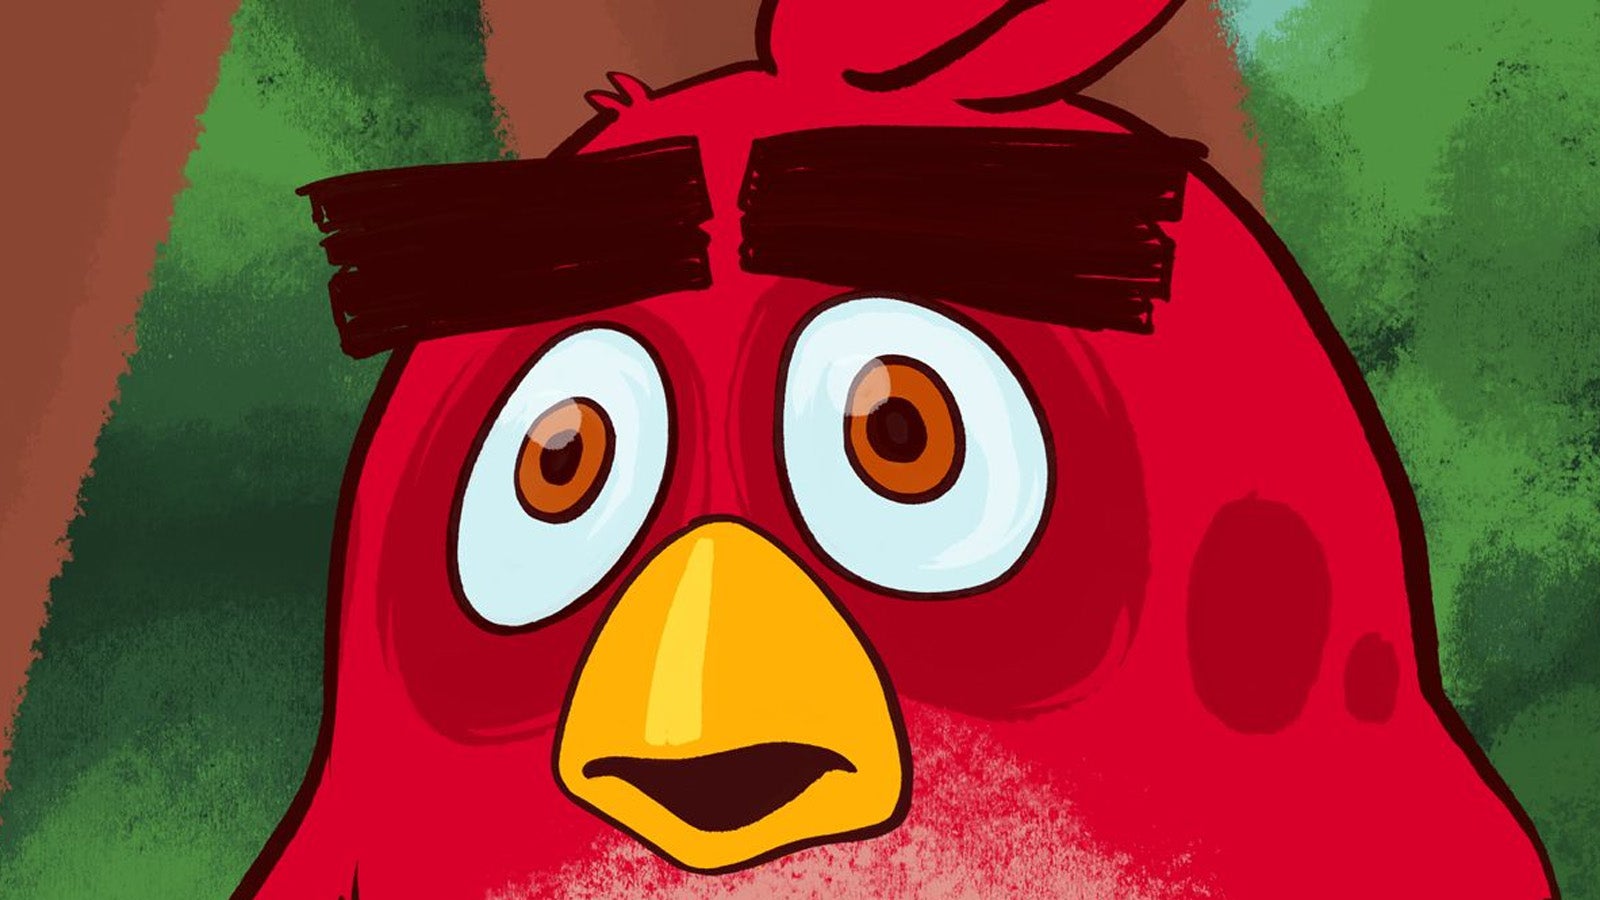 Angry Birds will leave Android store, developer says it's just toopopular